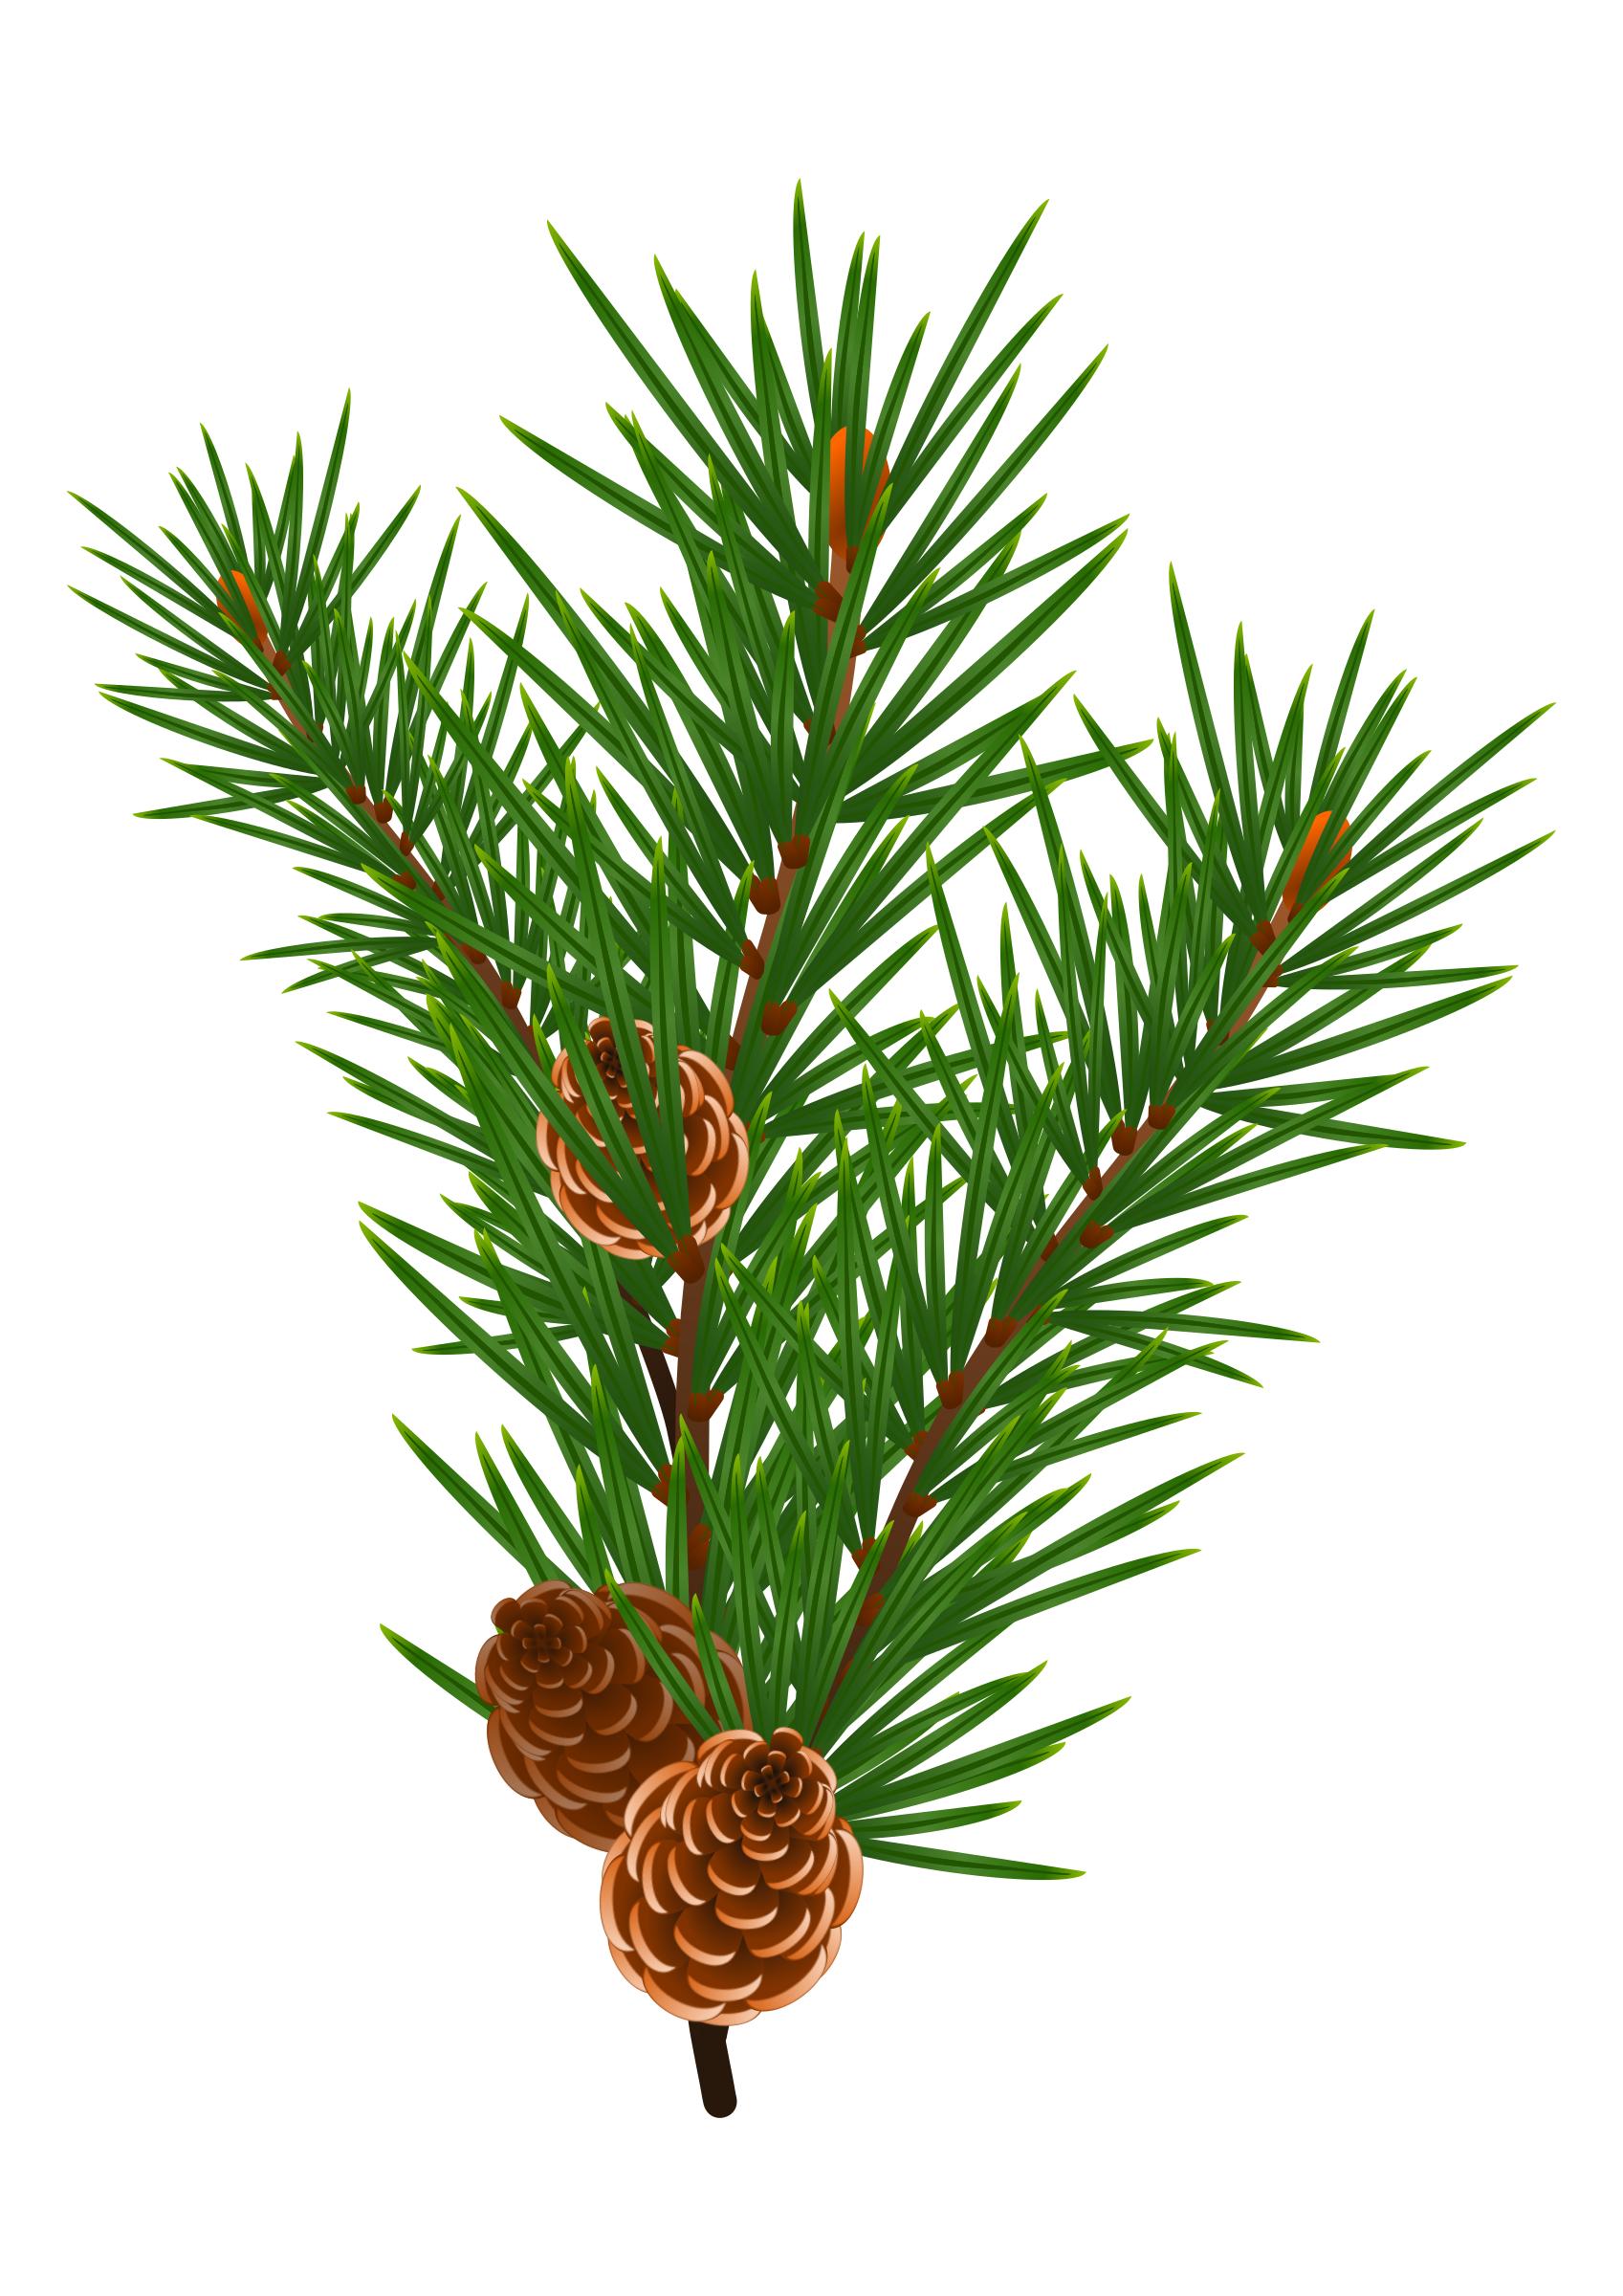 PIne branch #2 Icons PNG - Free PNG and Icons Downloads